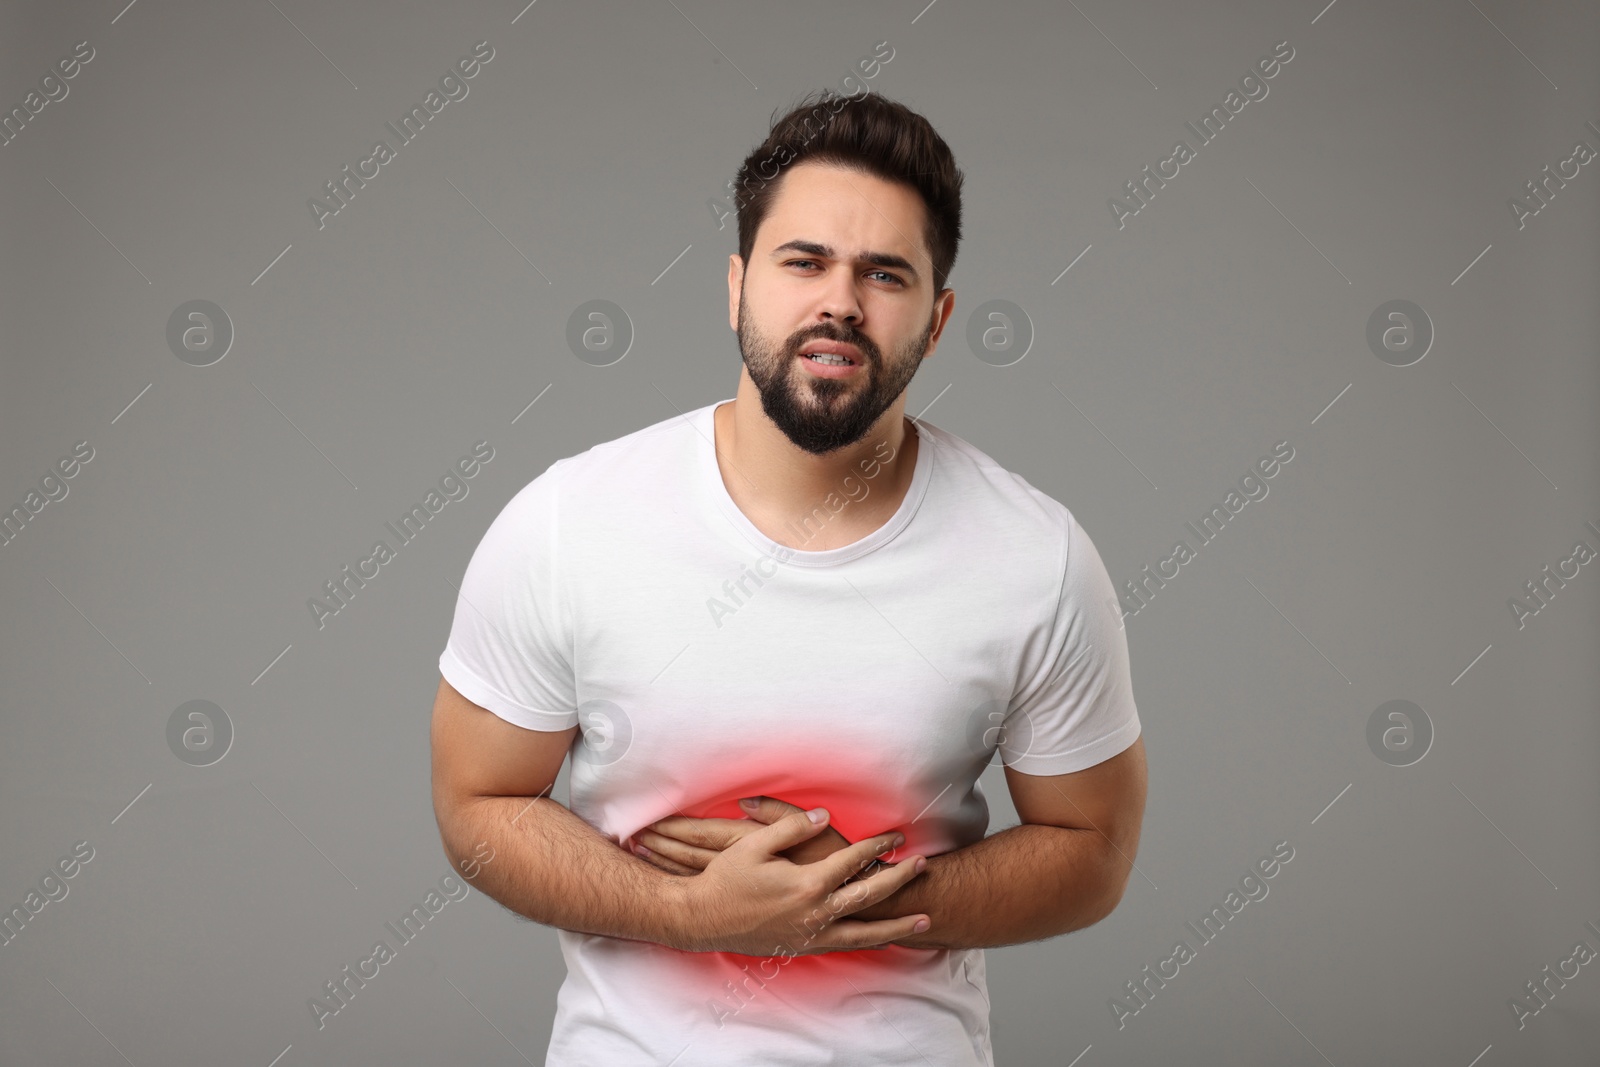 Image of Man suffering from stomach pain on grey background